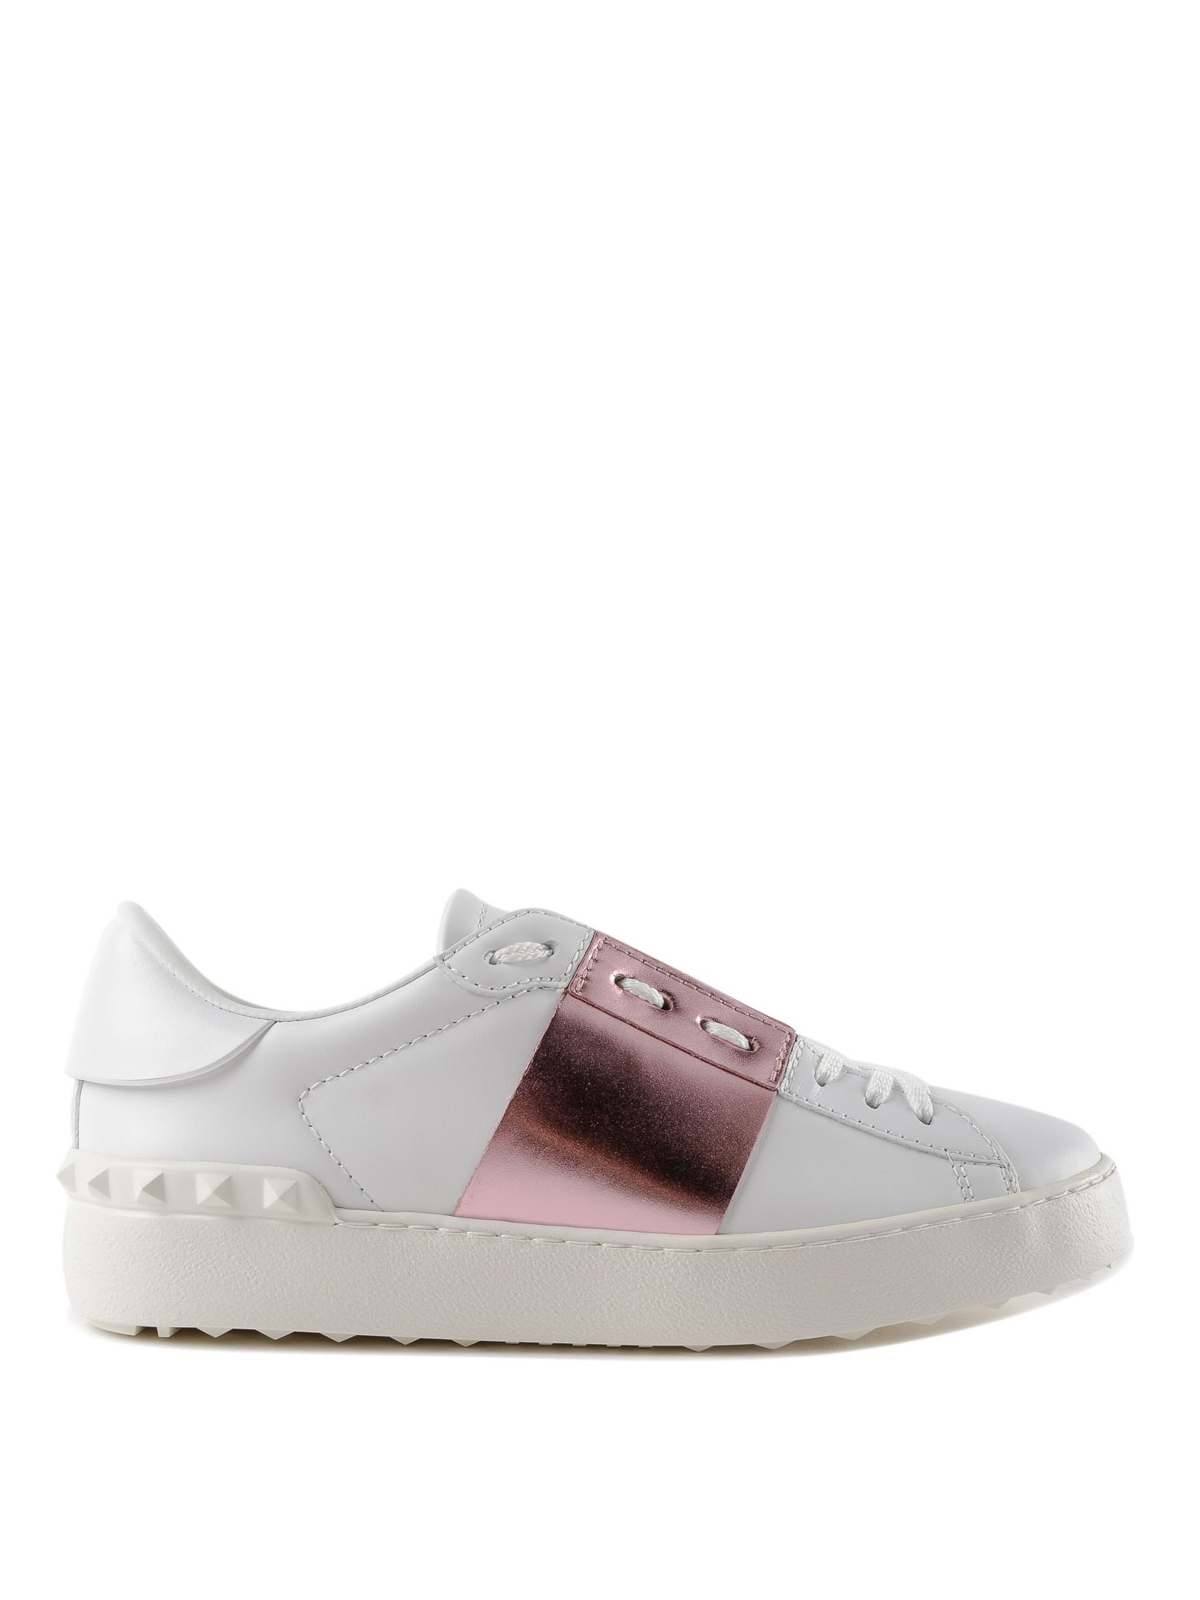 white sneakers with pink metallic band 